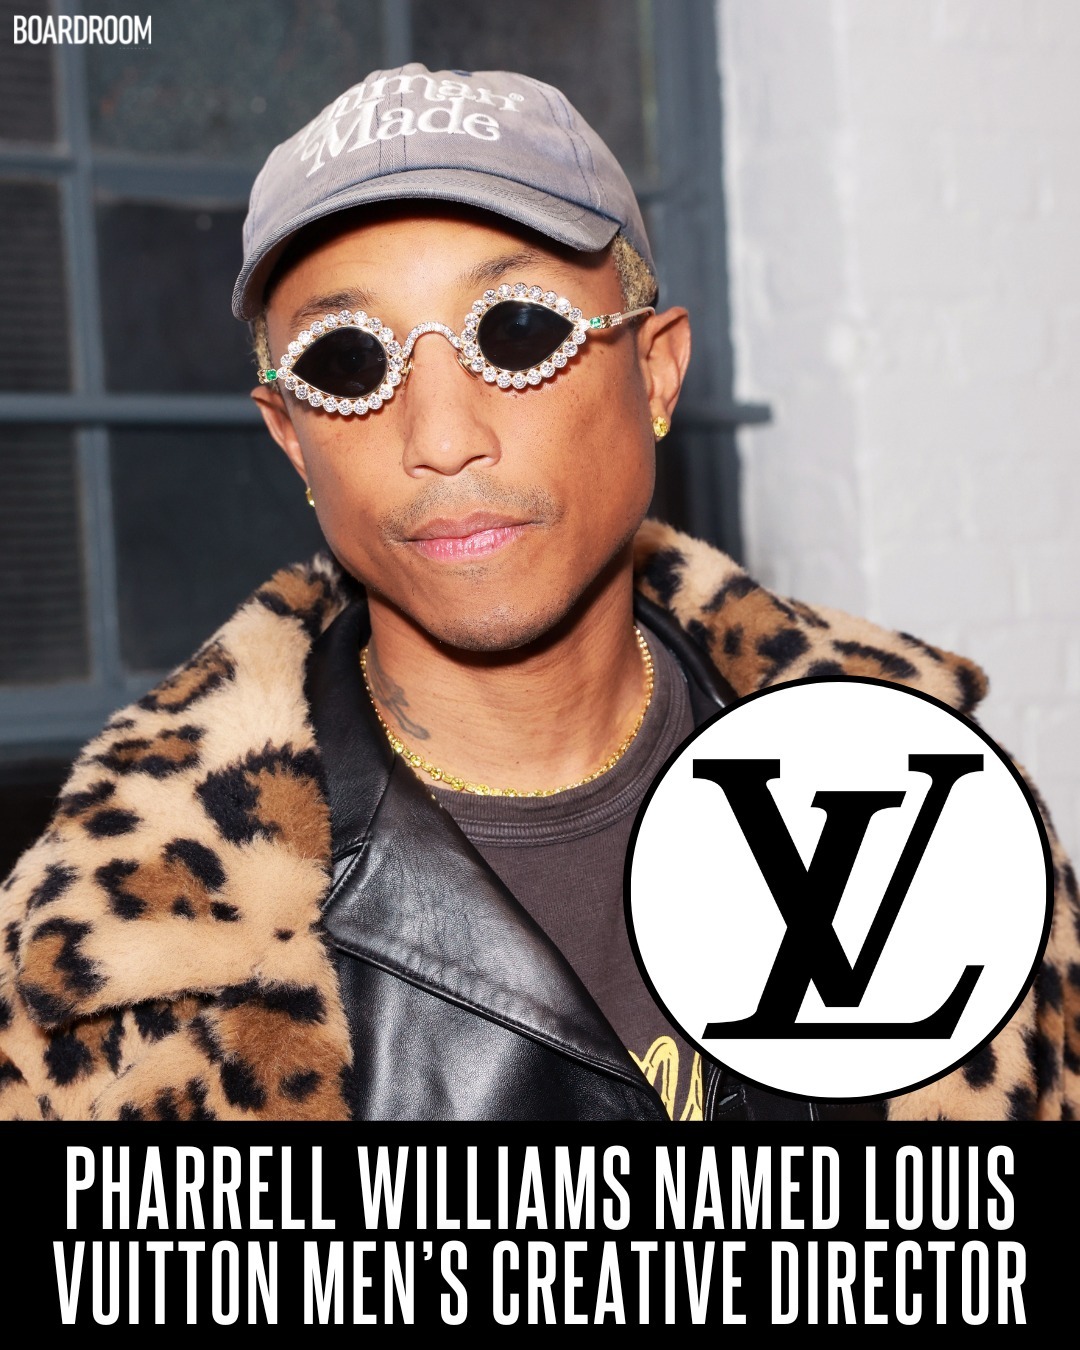 Boardroom on X: BREAKING: Louis Vuitton confirms Pharrell